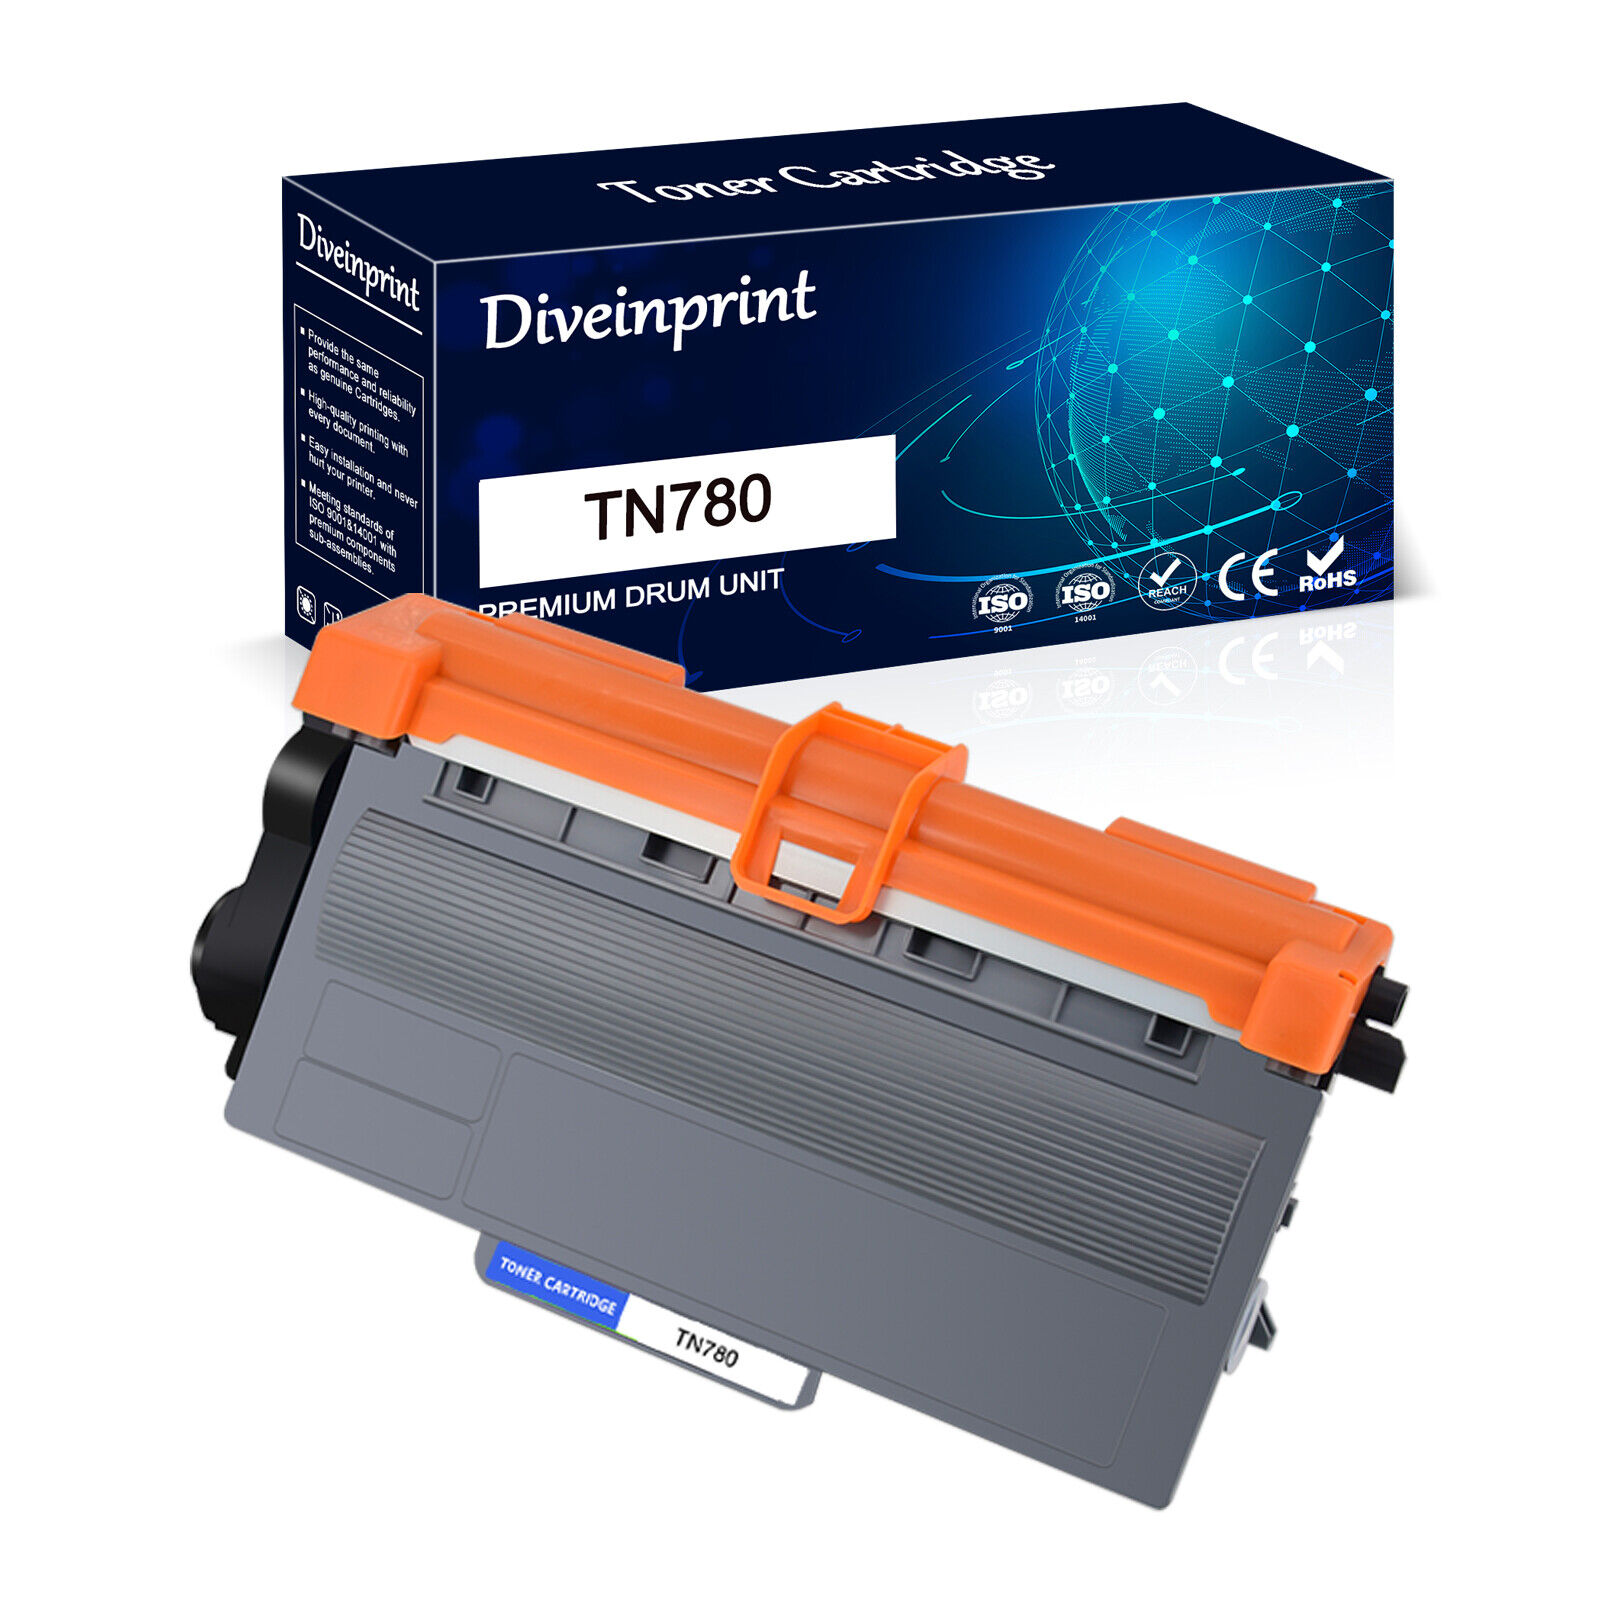 TN780 Toner Cartridge & DR720 Drum For Brother DCP-8110DN HL-5450DN MFC-8510DN